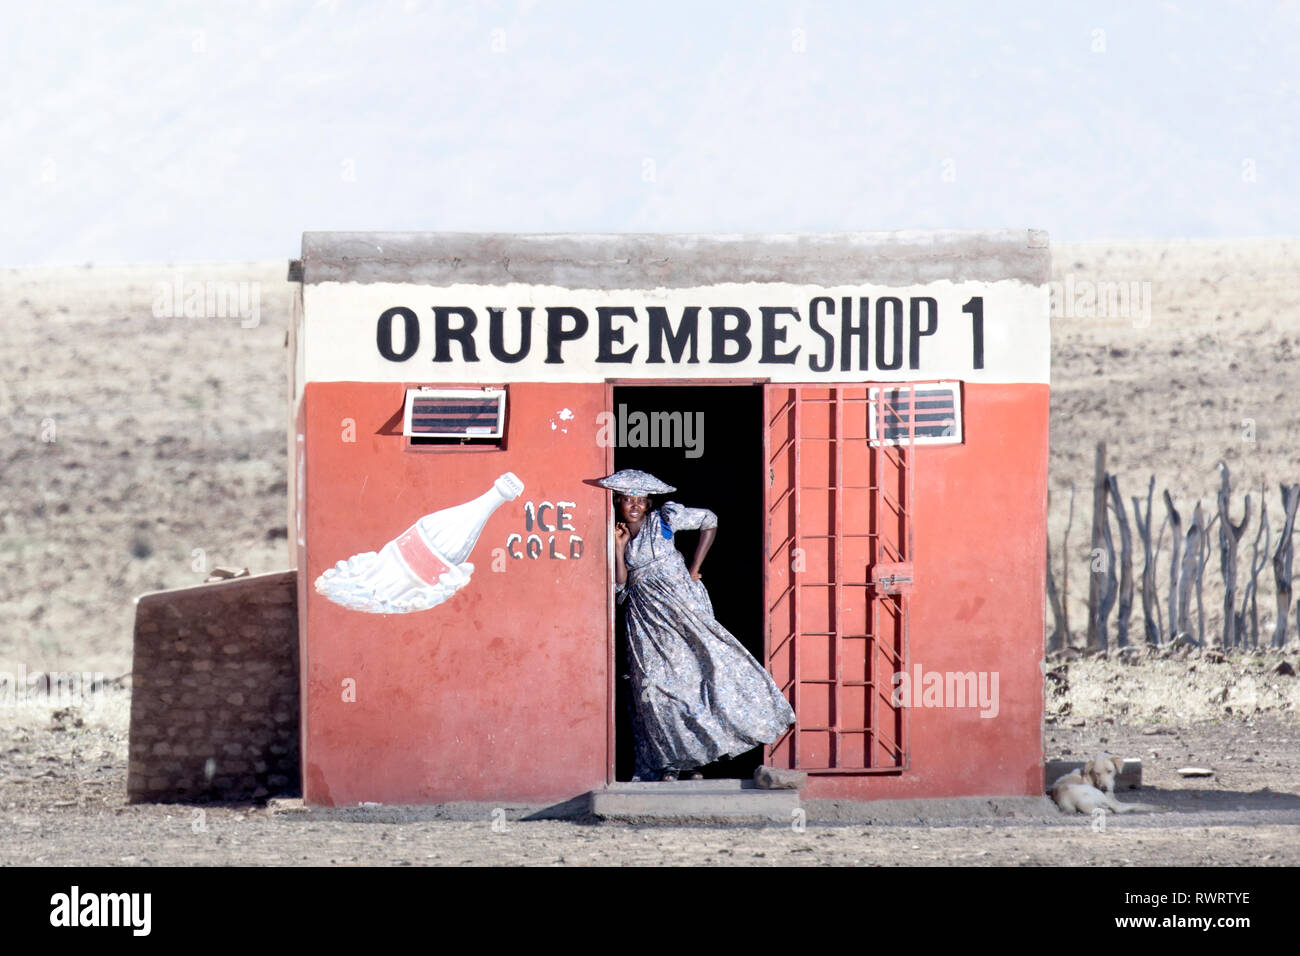 A Herero woman by a shop in the arid Kunene Region of northern Namibia. Stock Photo